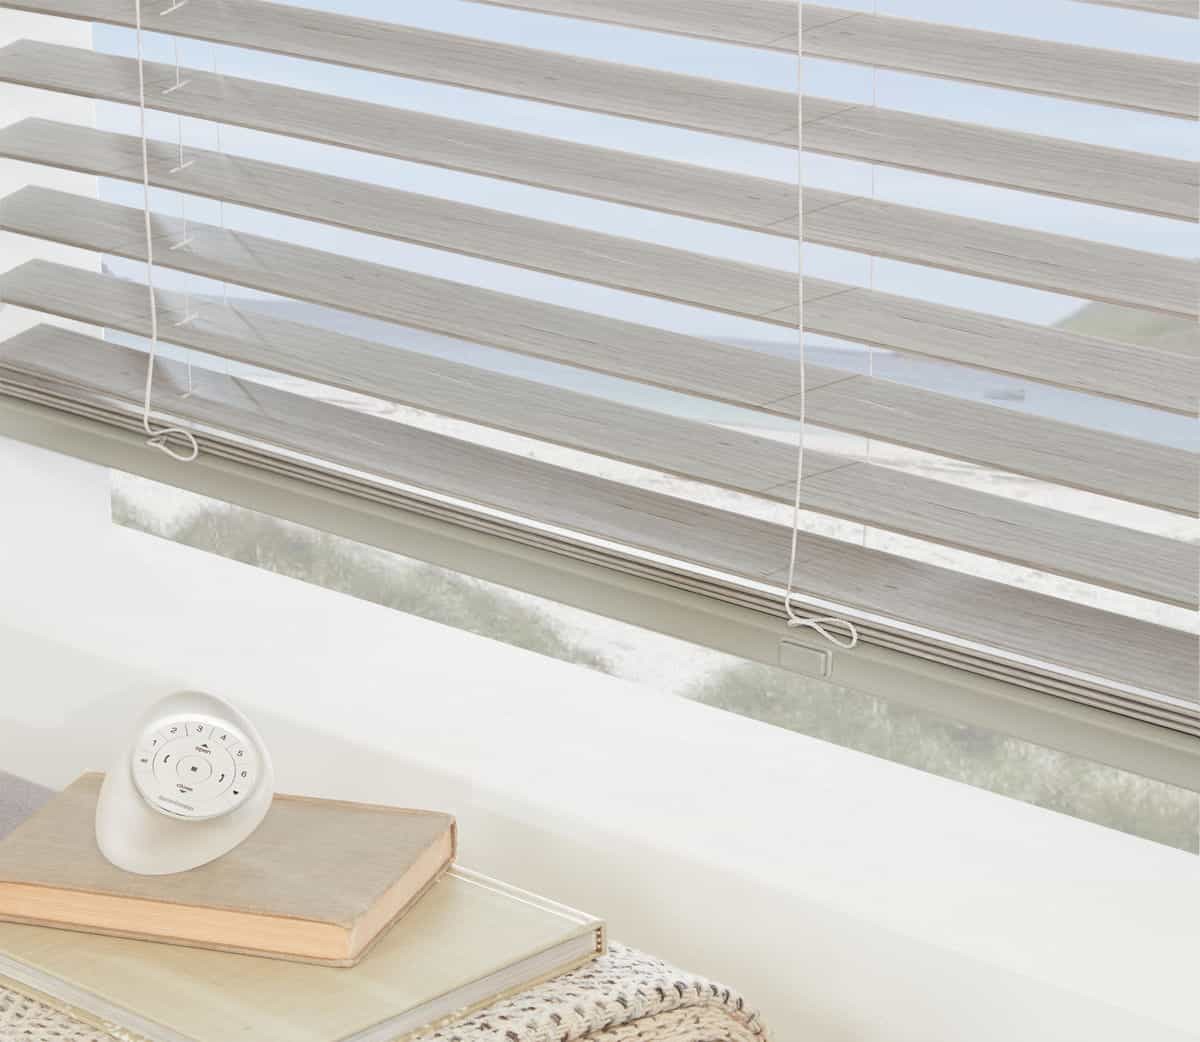 Hunter Douglas PowerView® Automation Motorized Blinds Automatic Shades Smart Shades near Lee County, Florida (FL).